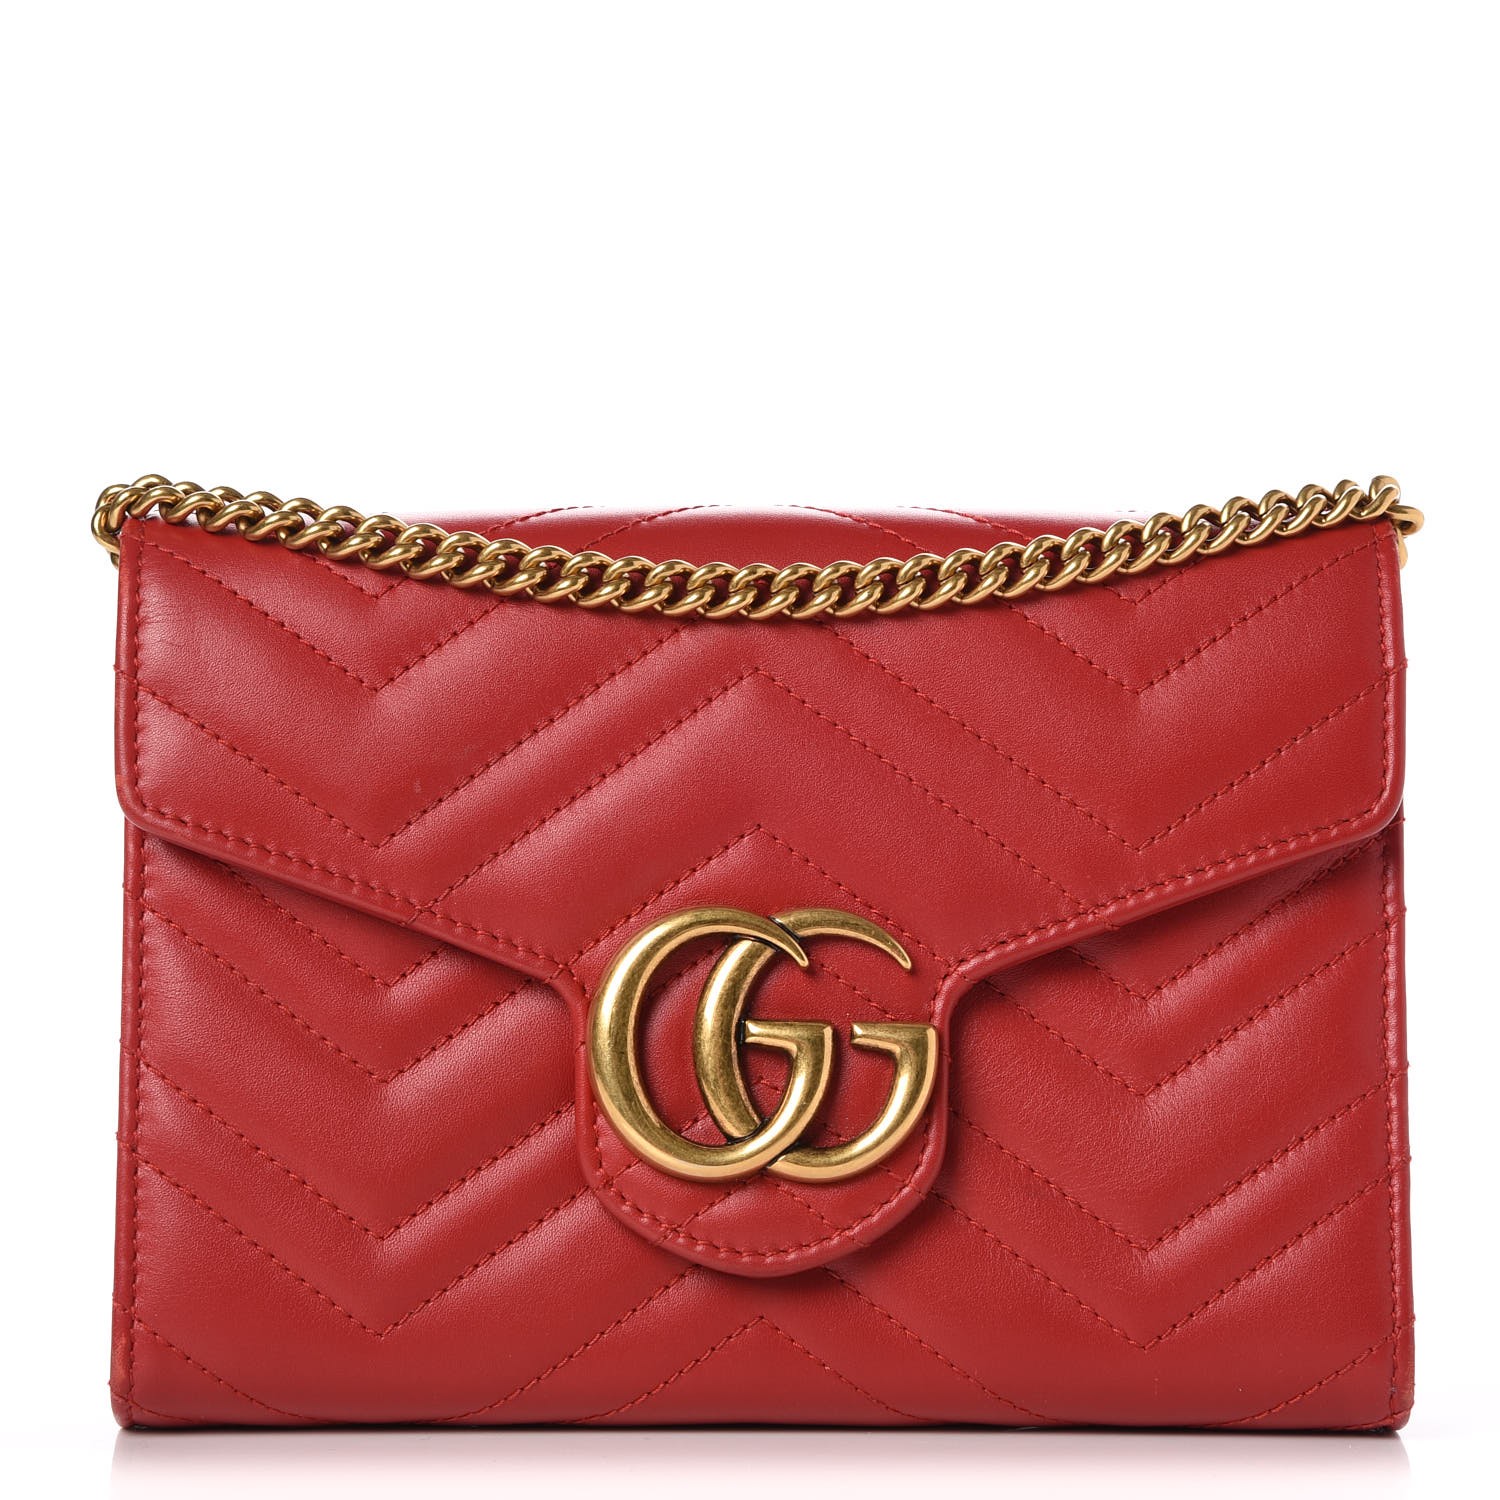 GUCCI Calfskin Matelasse GG Marmont Chain Wallet Red 322054